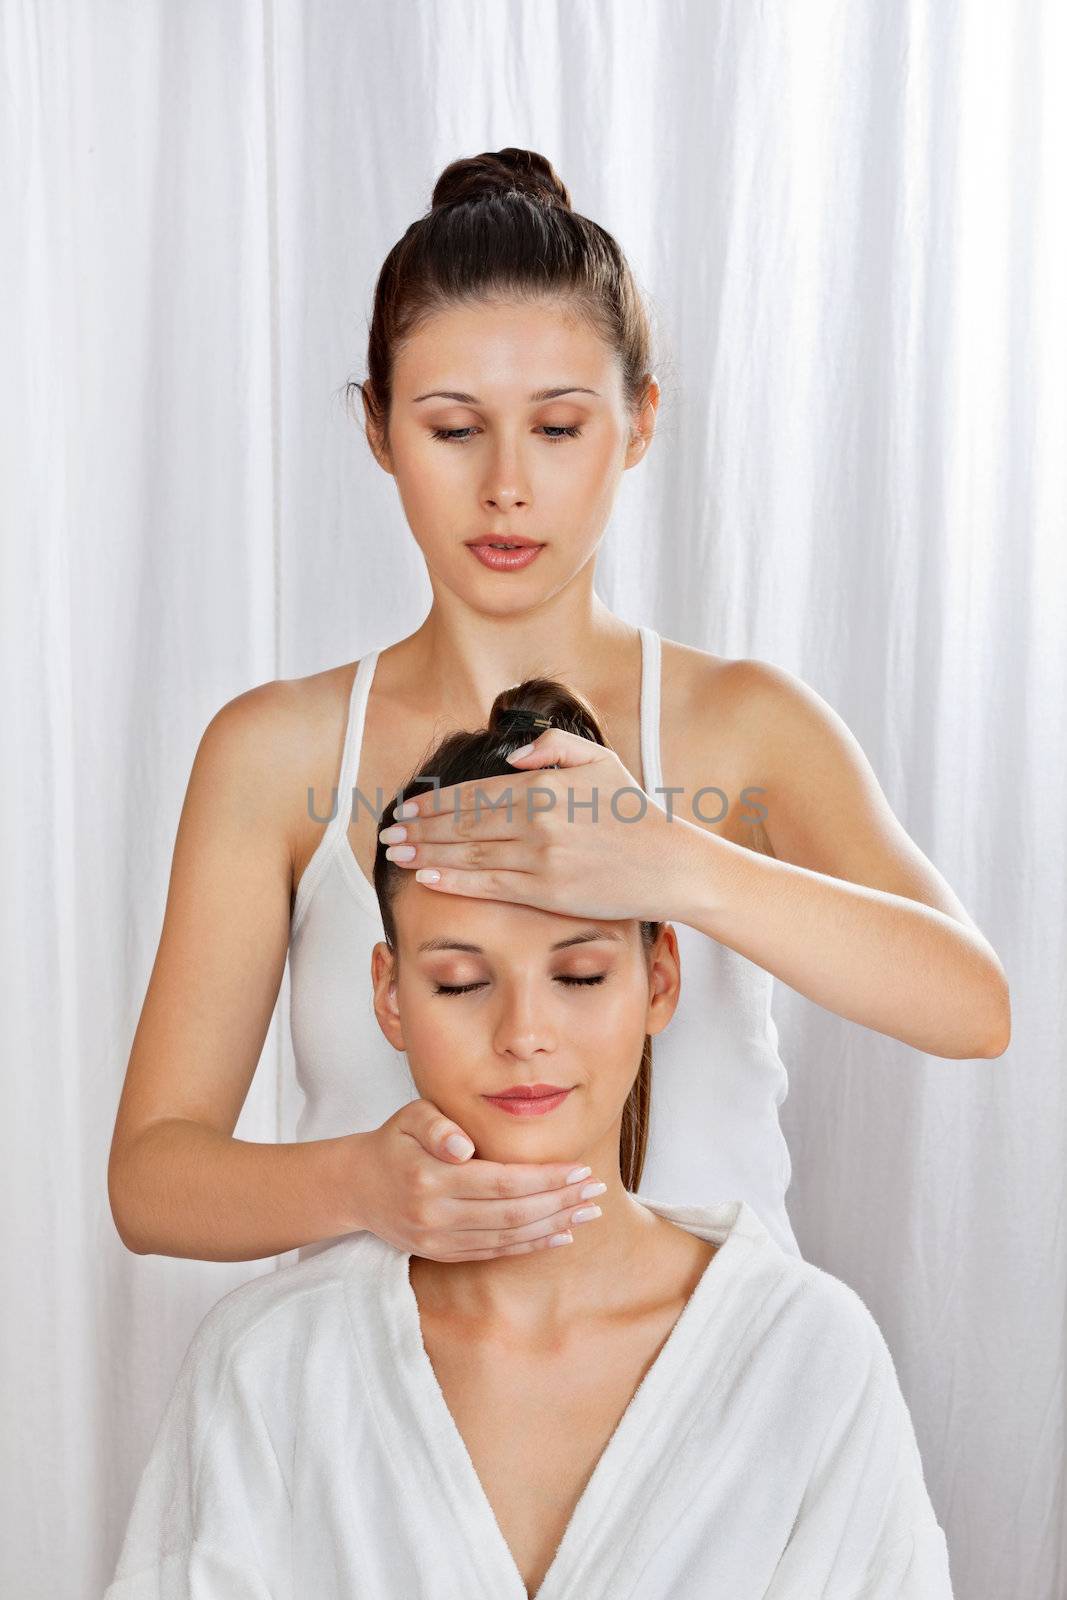 Masseuse Giving Head Massage To Woman by leaf